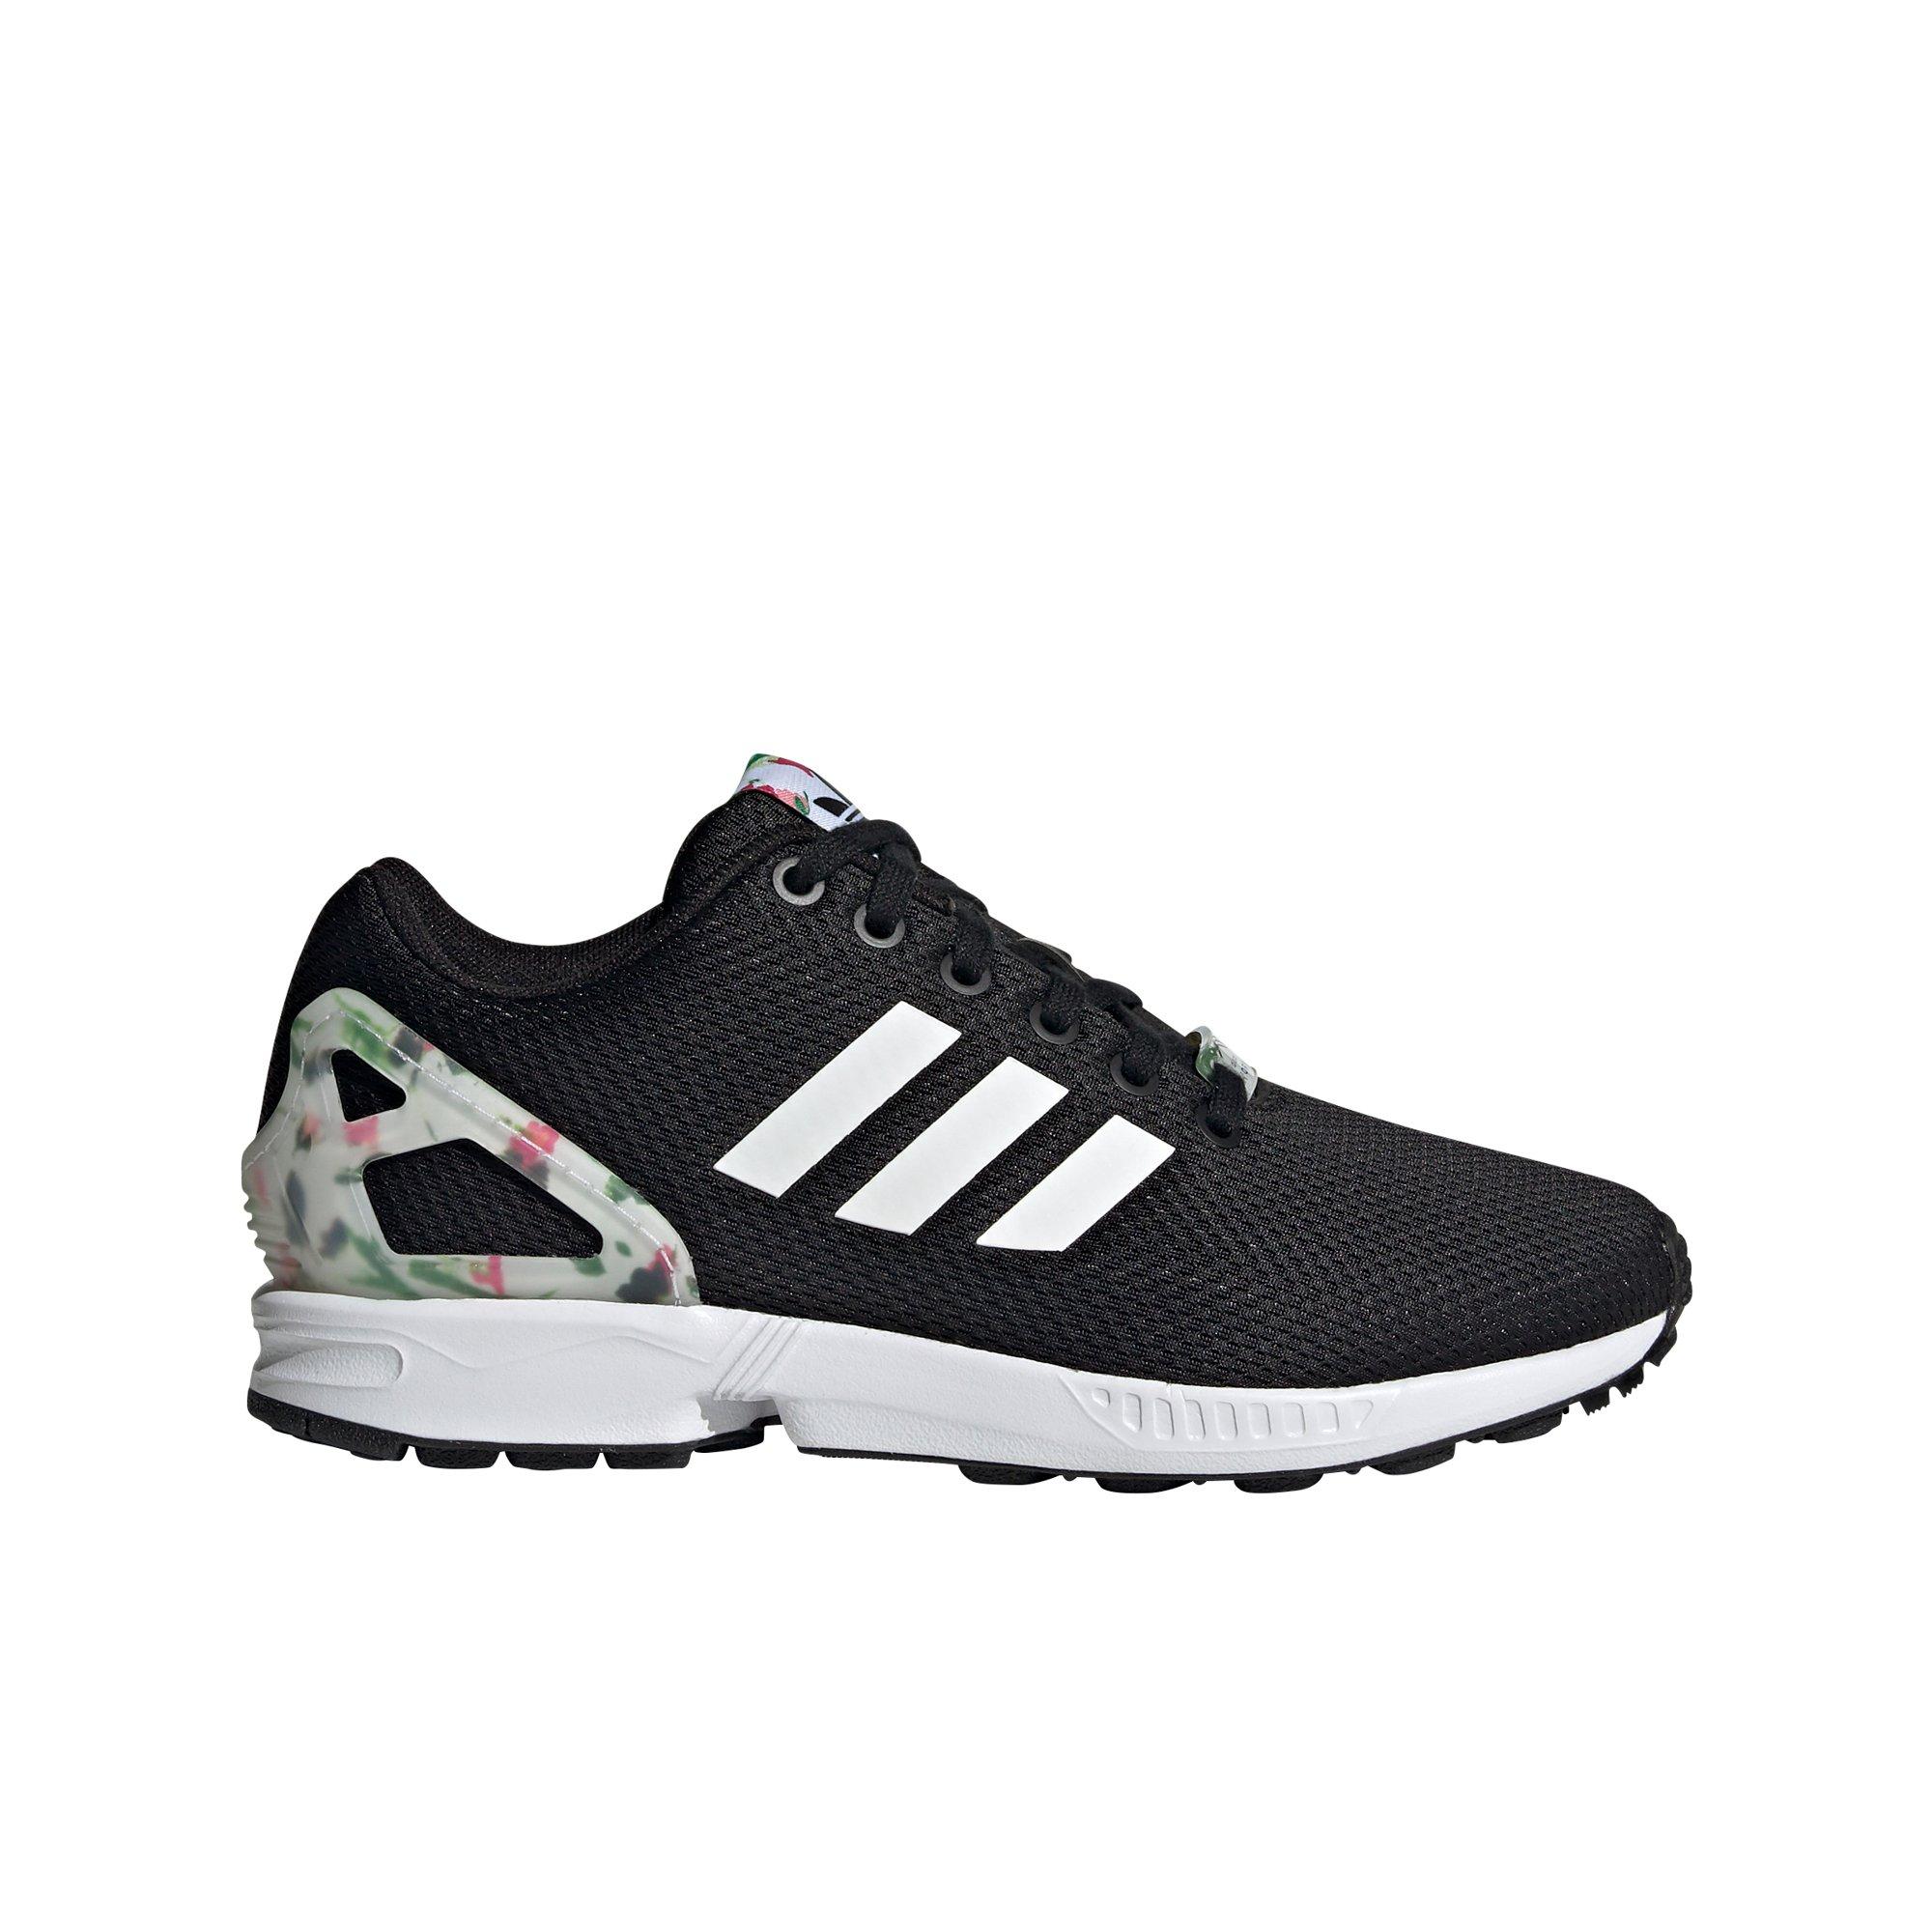 adidas zx flux womens floral